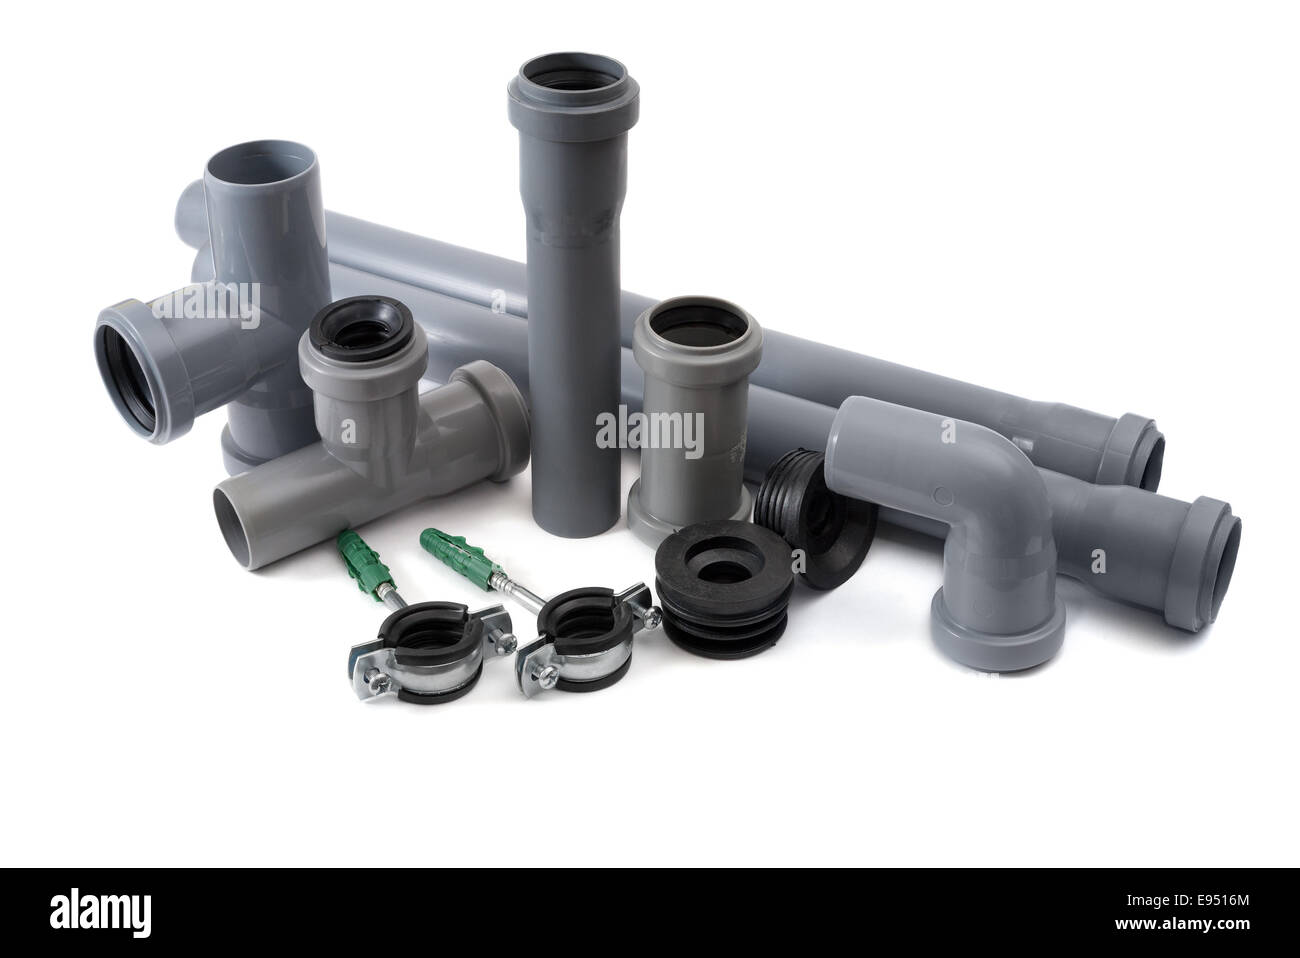 Sewer pipes of pvc Stock Photo